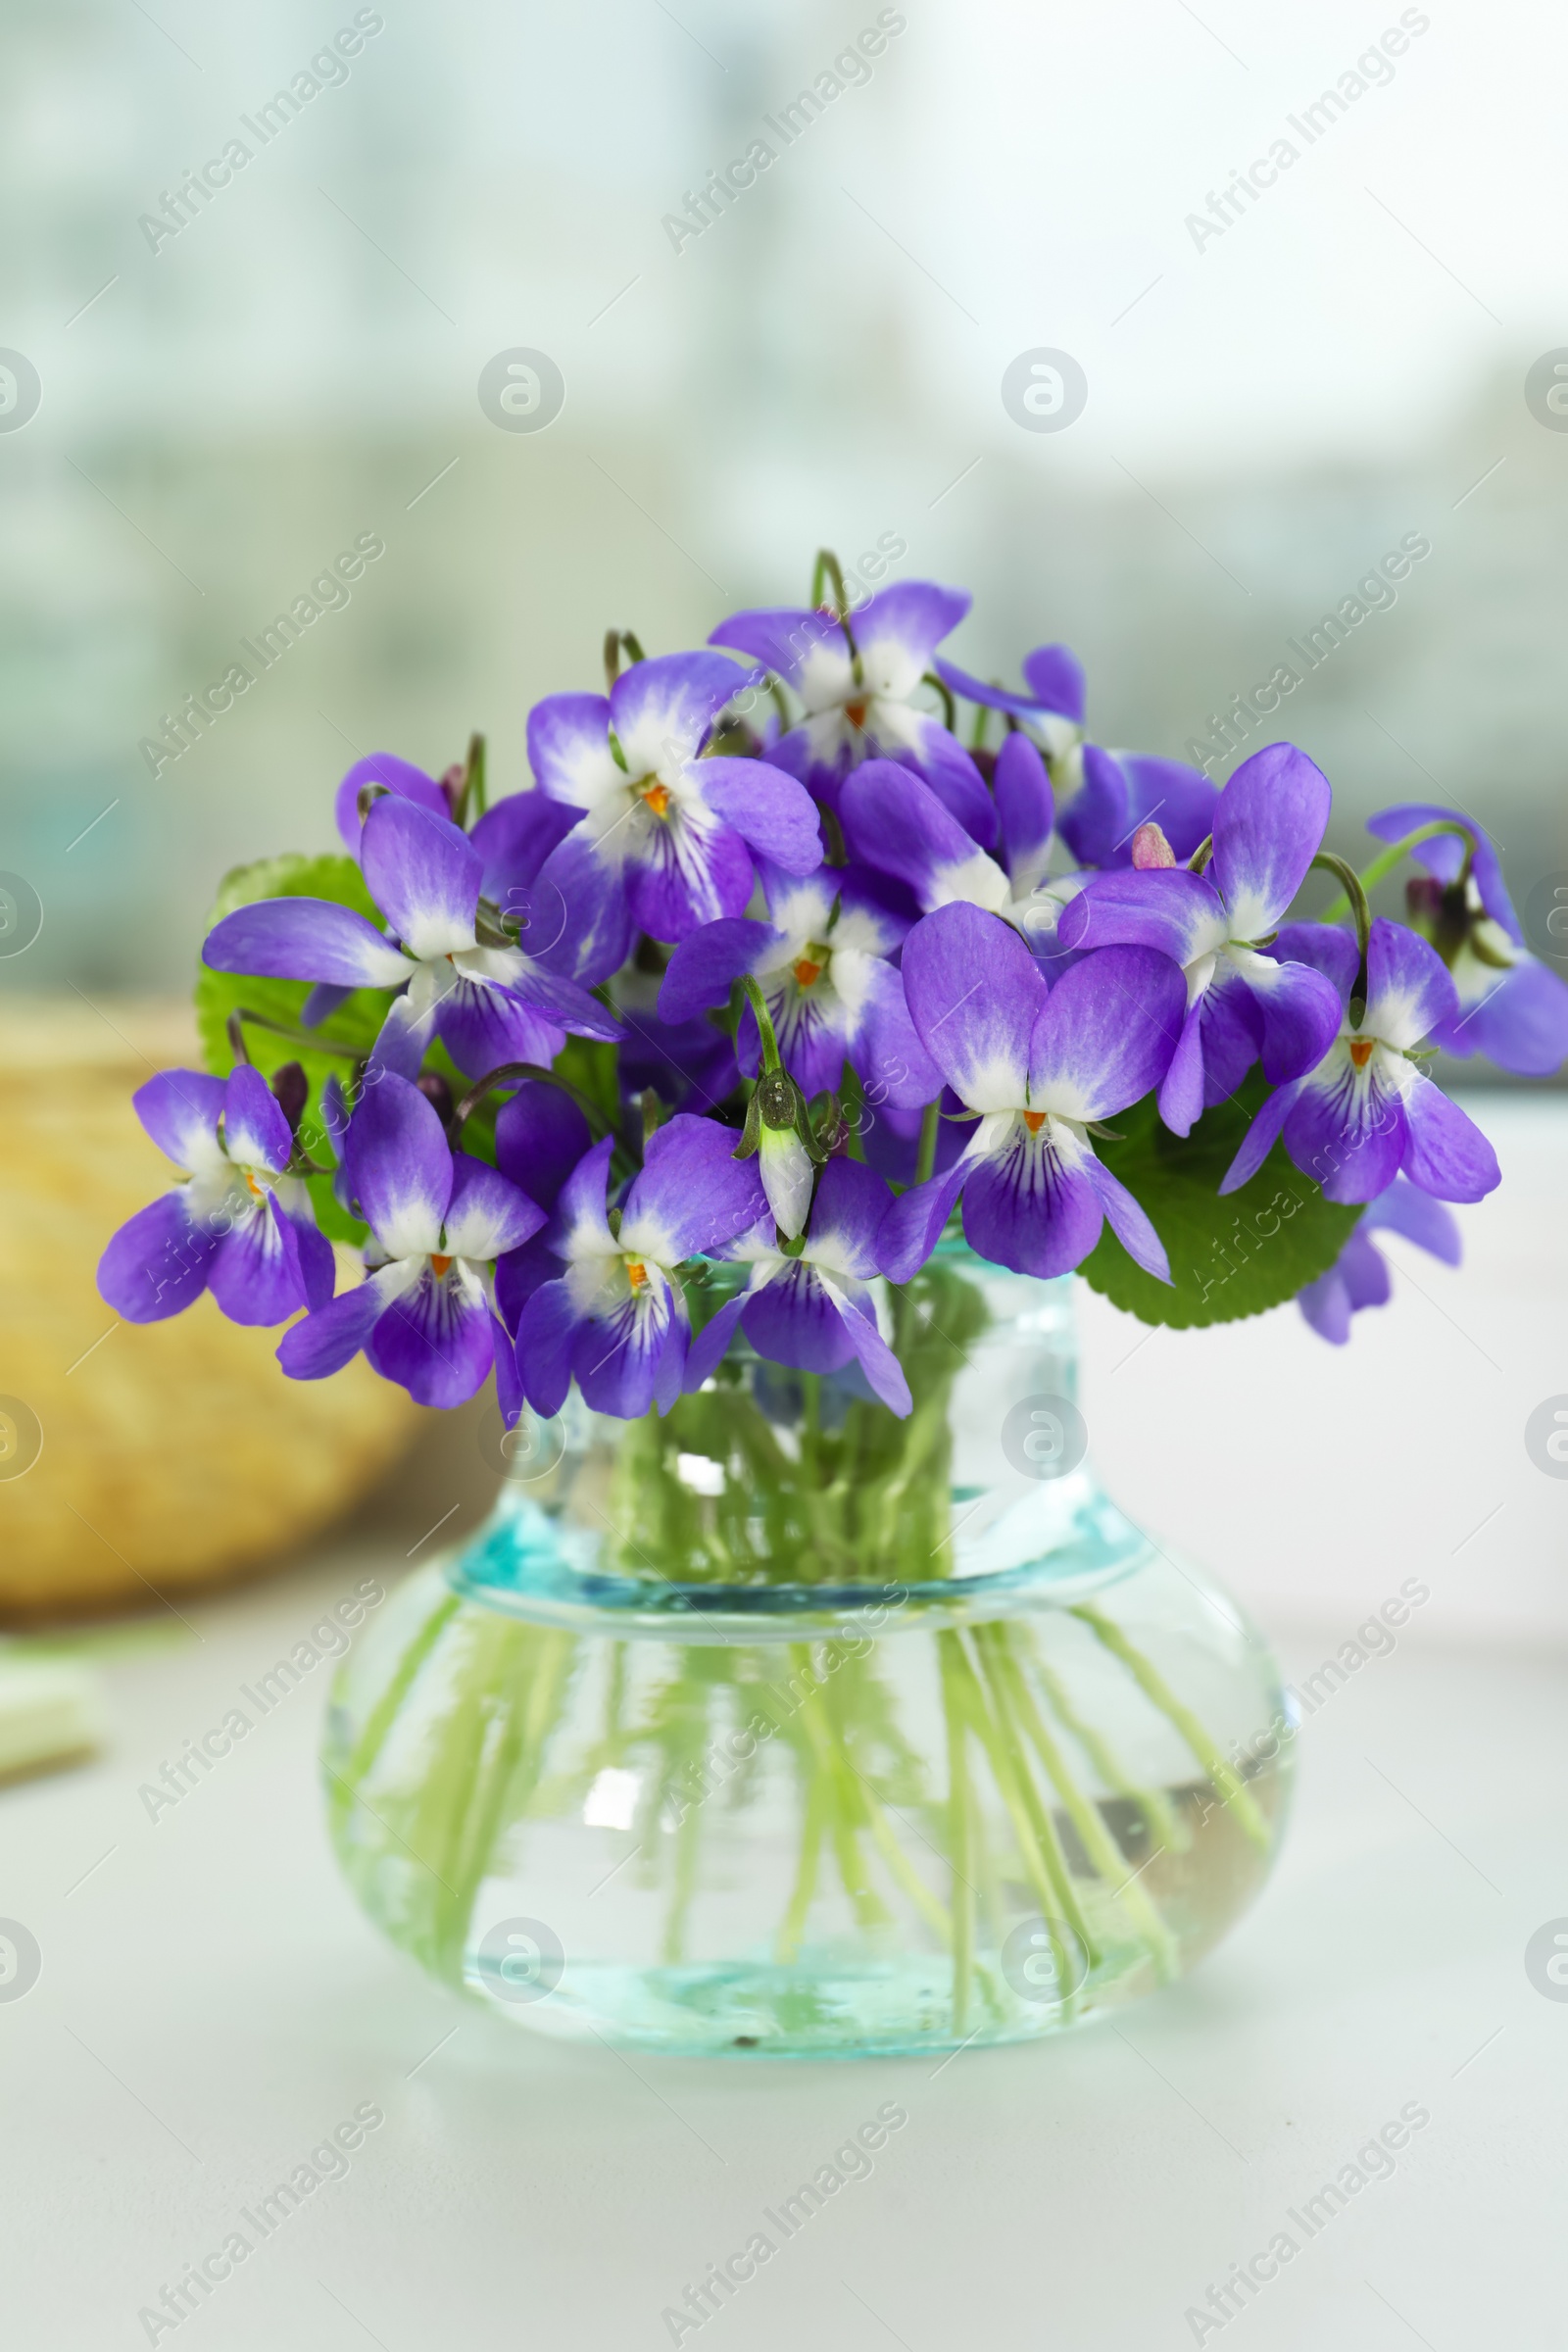 Photo of Beautiful wood violets in glass vase on window sill indoors. Spring flowers